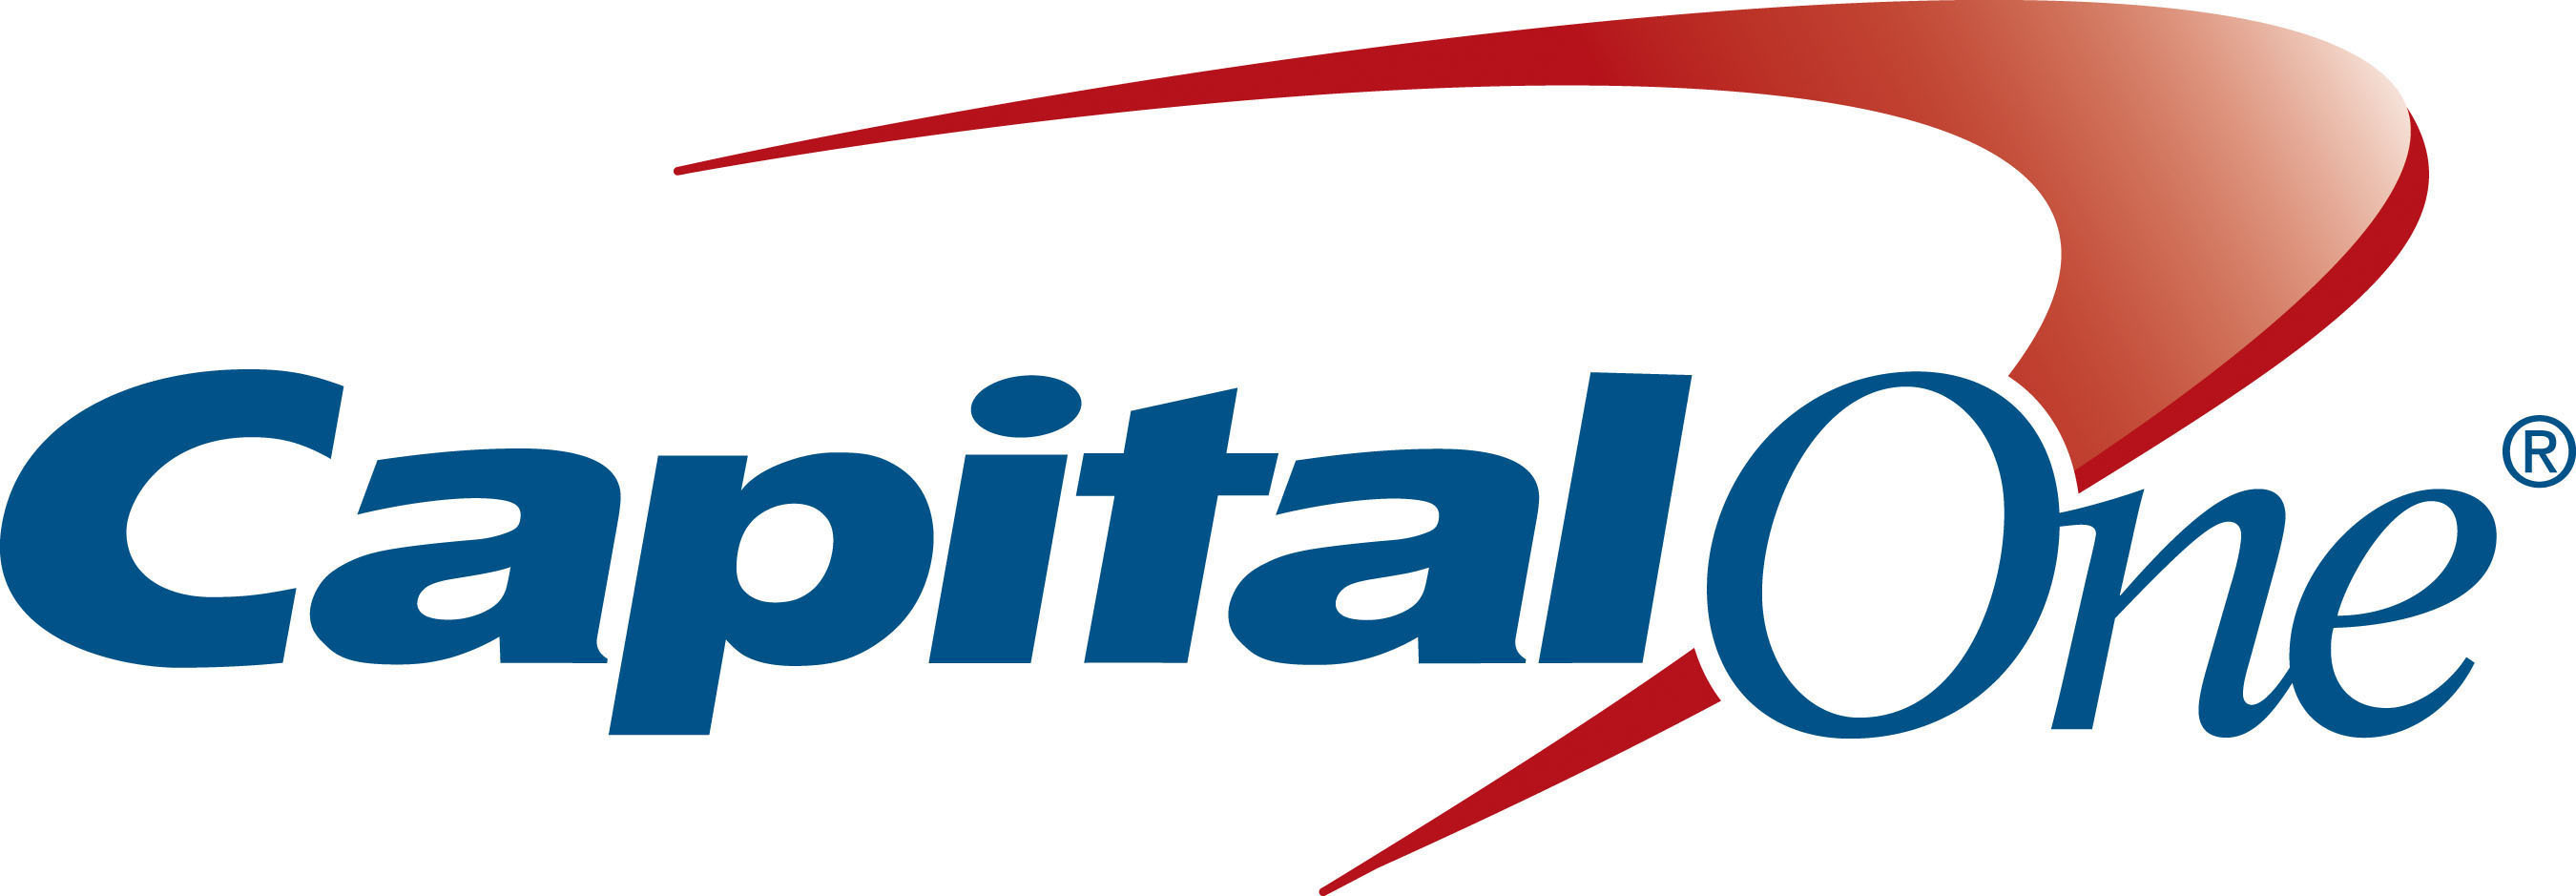 Capital One Financial Corporation (NYSE: COF), an official NCAA(R) Corporate Champion, announced the official winter standings for the Capital One Cup.